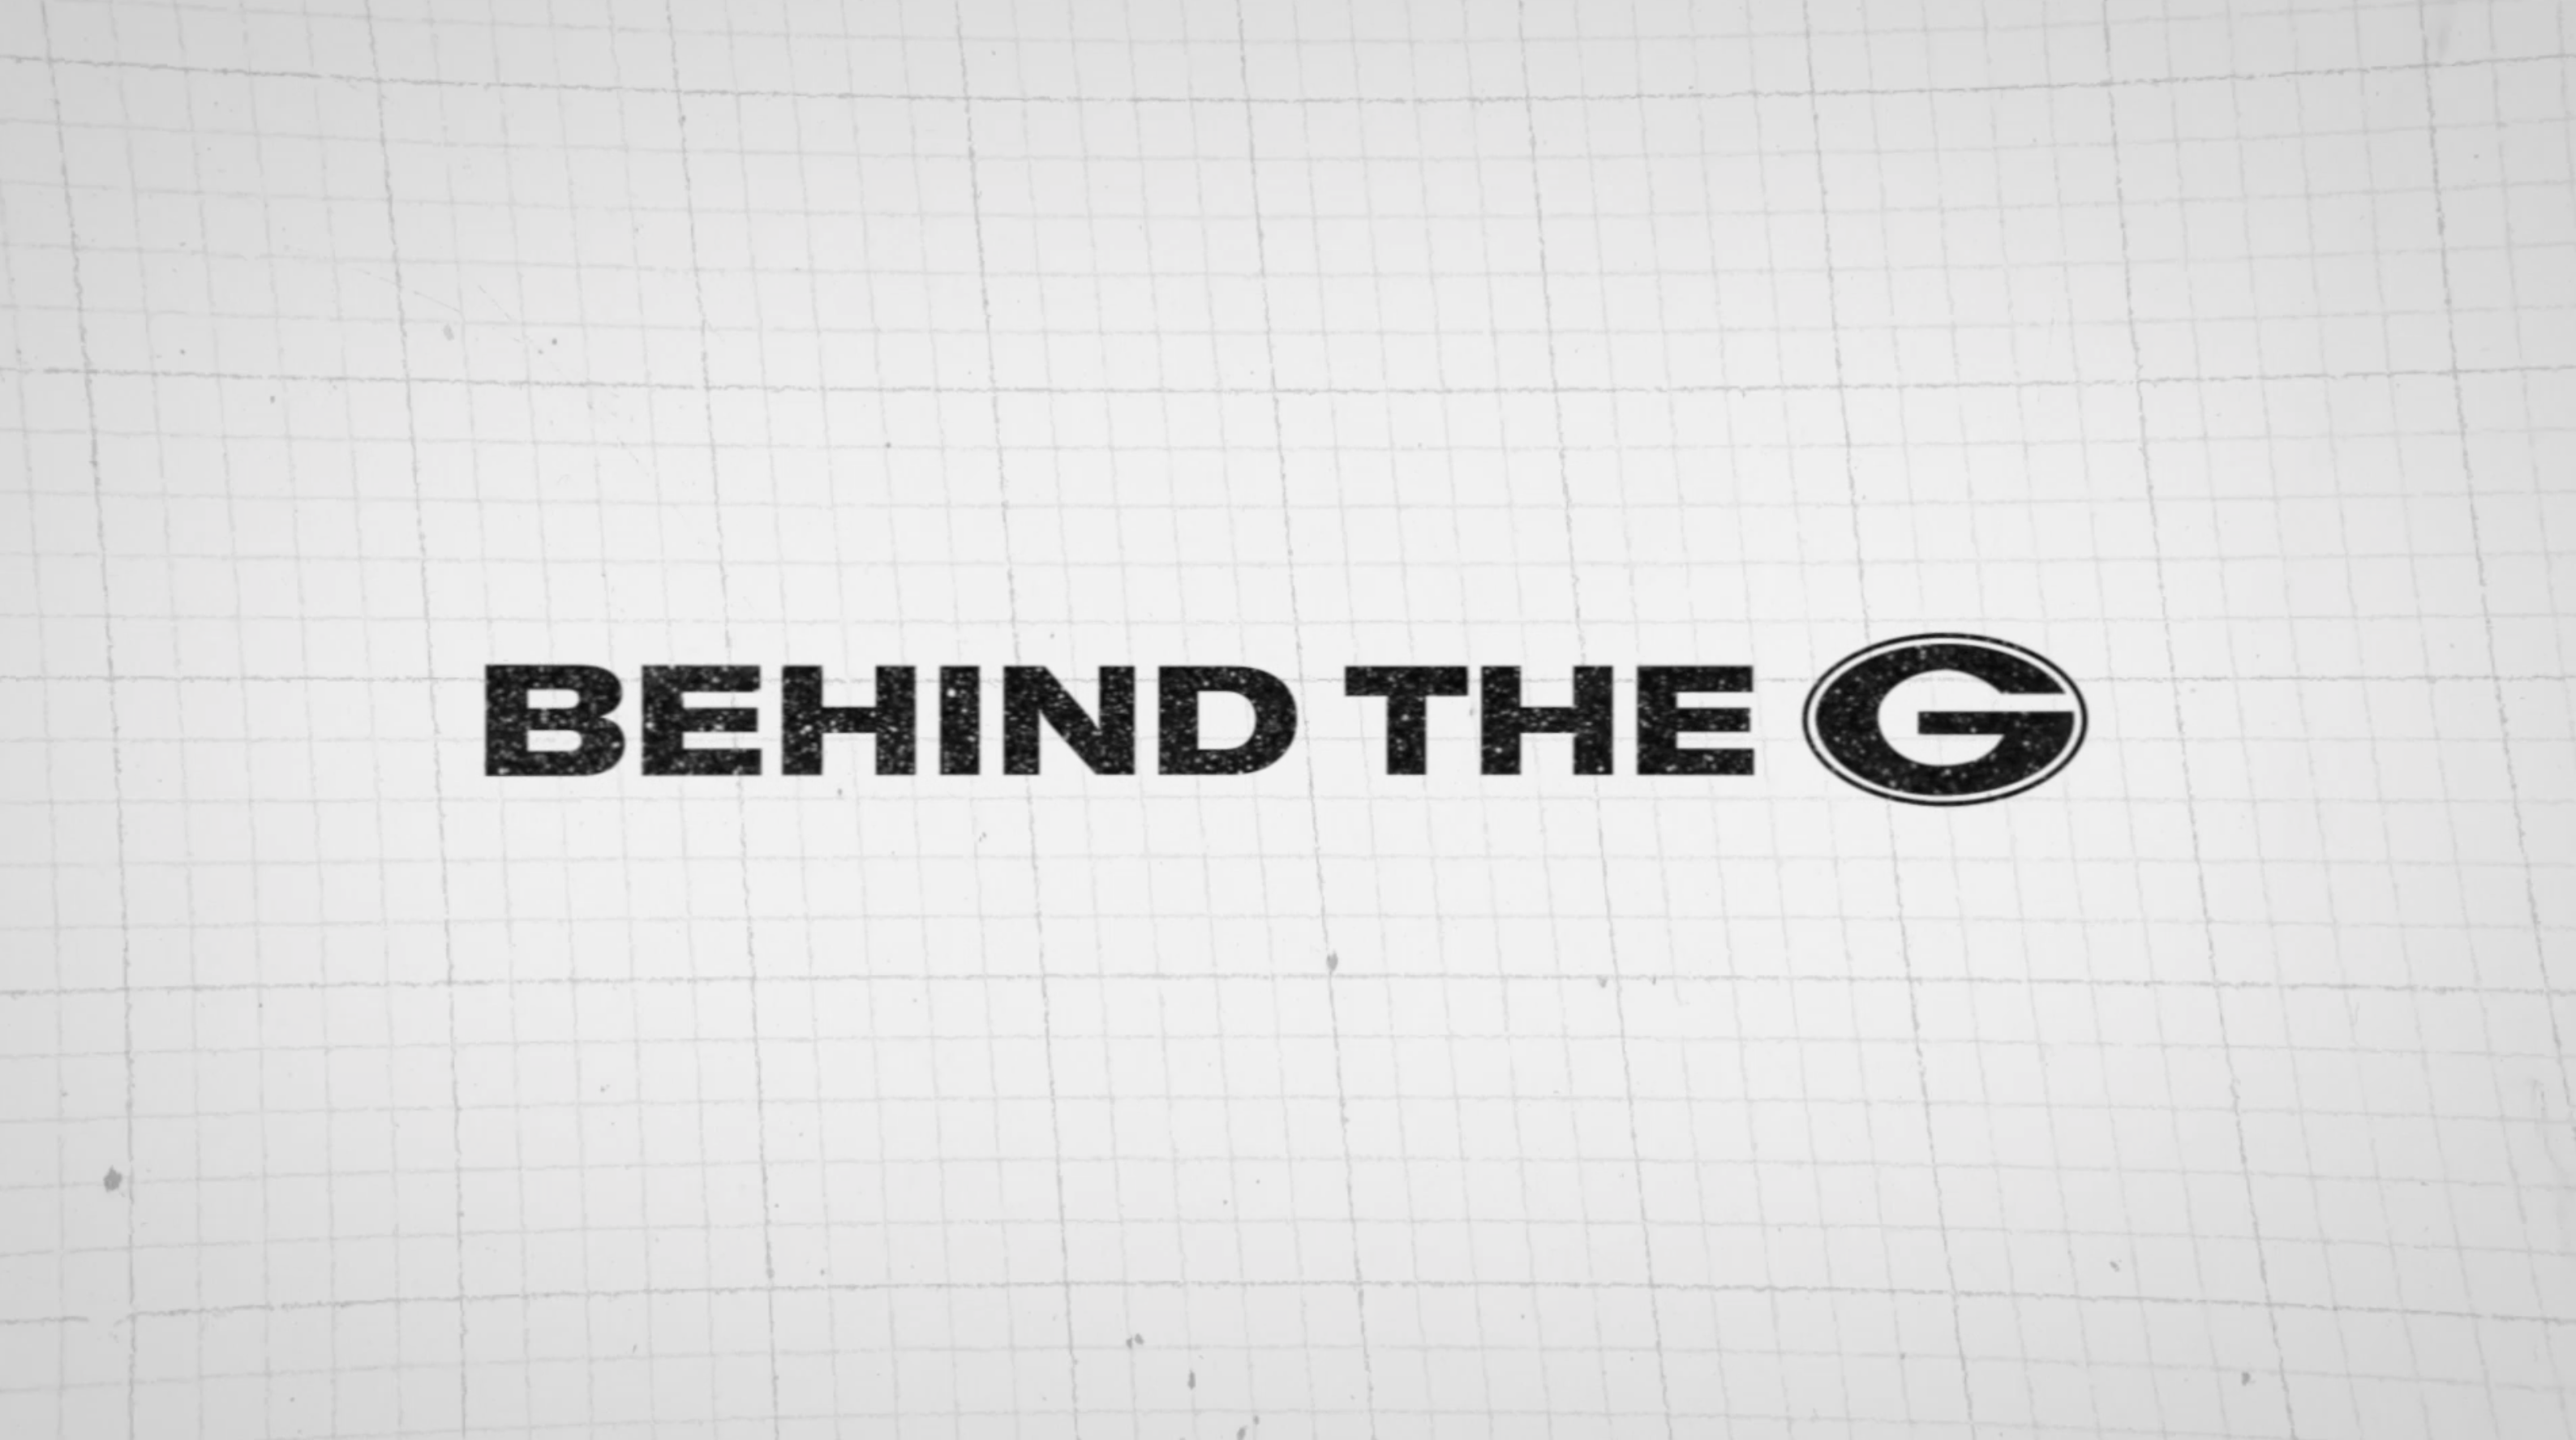 Title screen of Behind The G video series